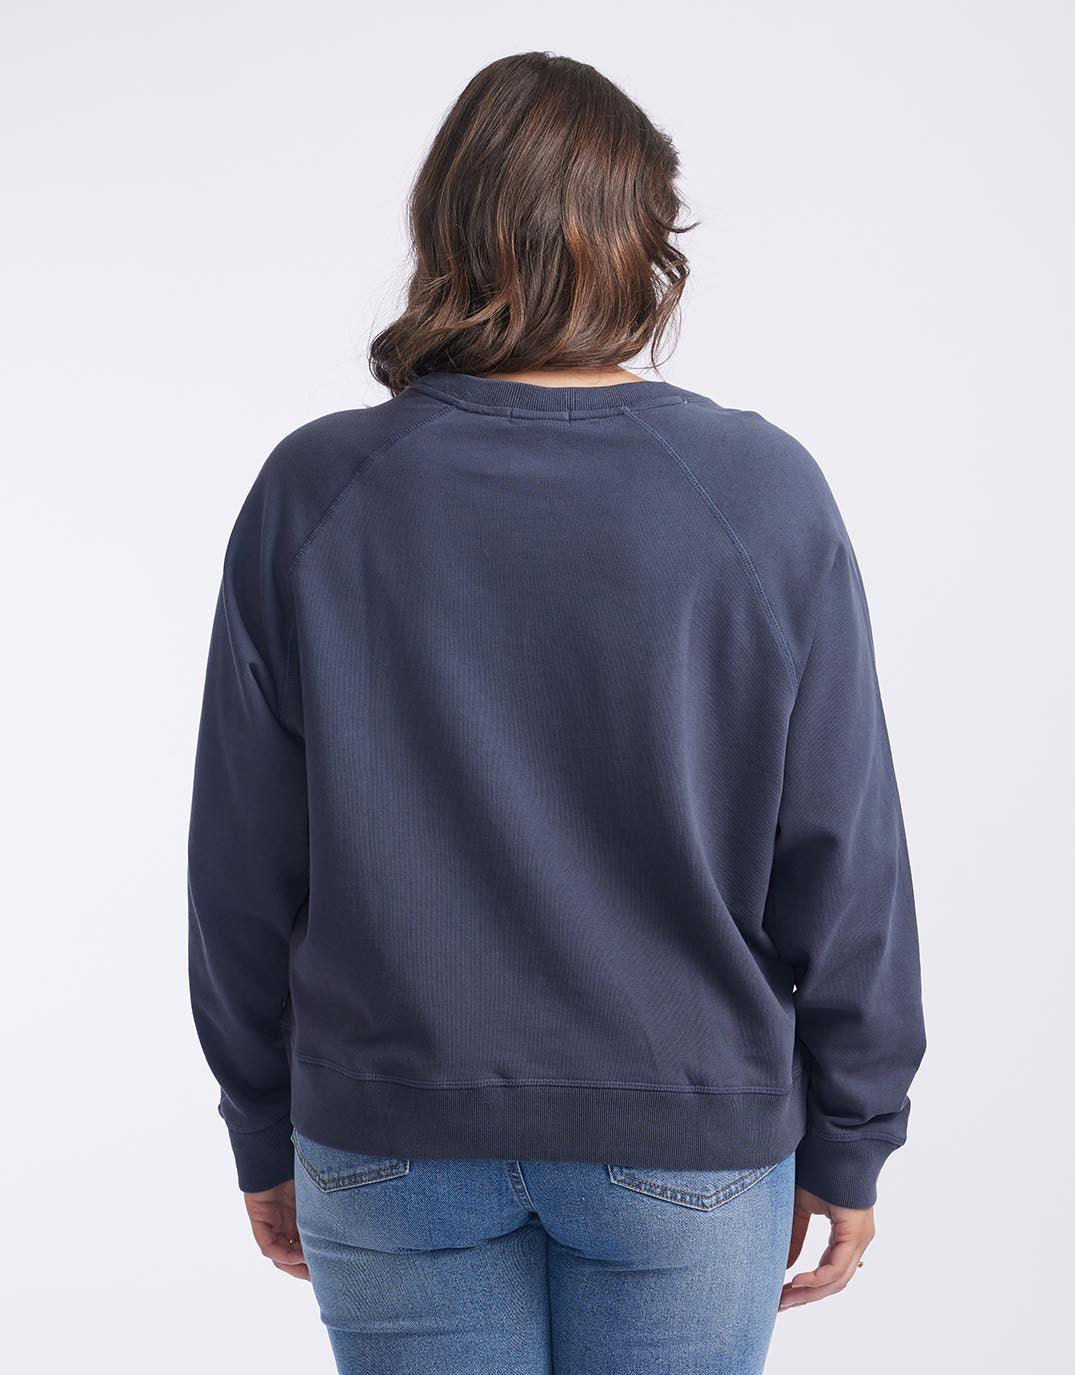 White & Co. - Original Lounge Crew - Washed Navy - White & Co Living Jumpers